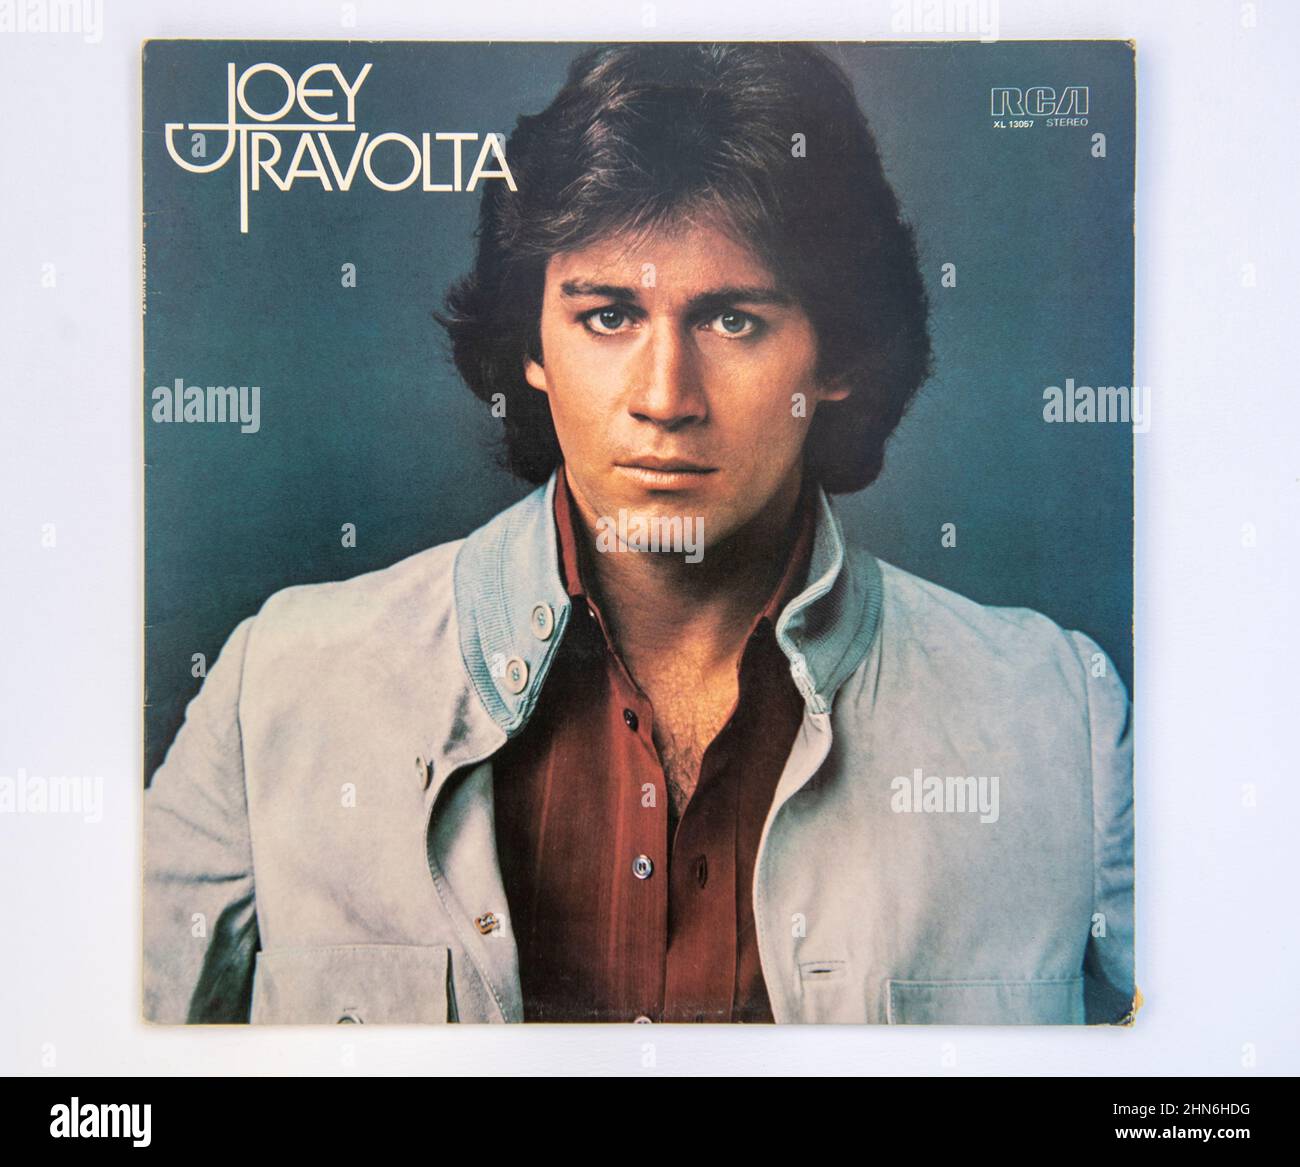 LP cover of the self-titled debut album by Joey Travolta, which was released in 1978. Stock Photo